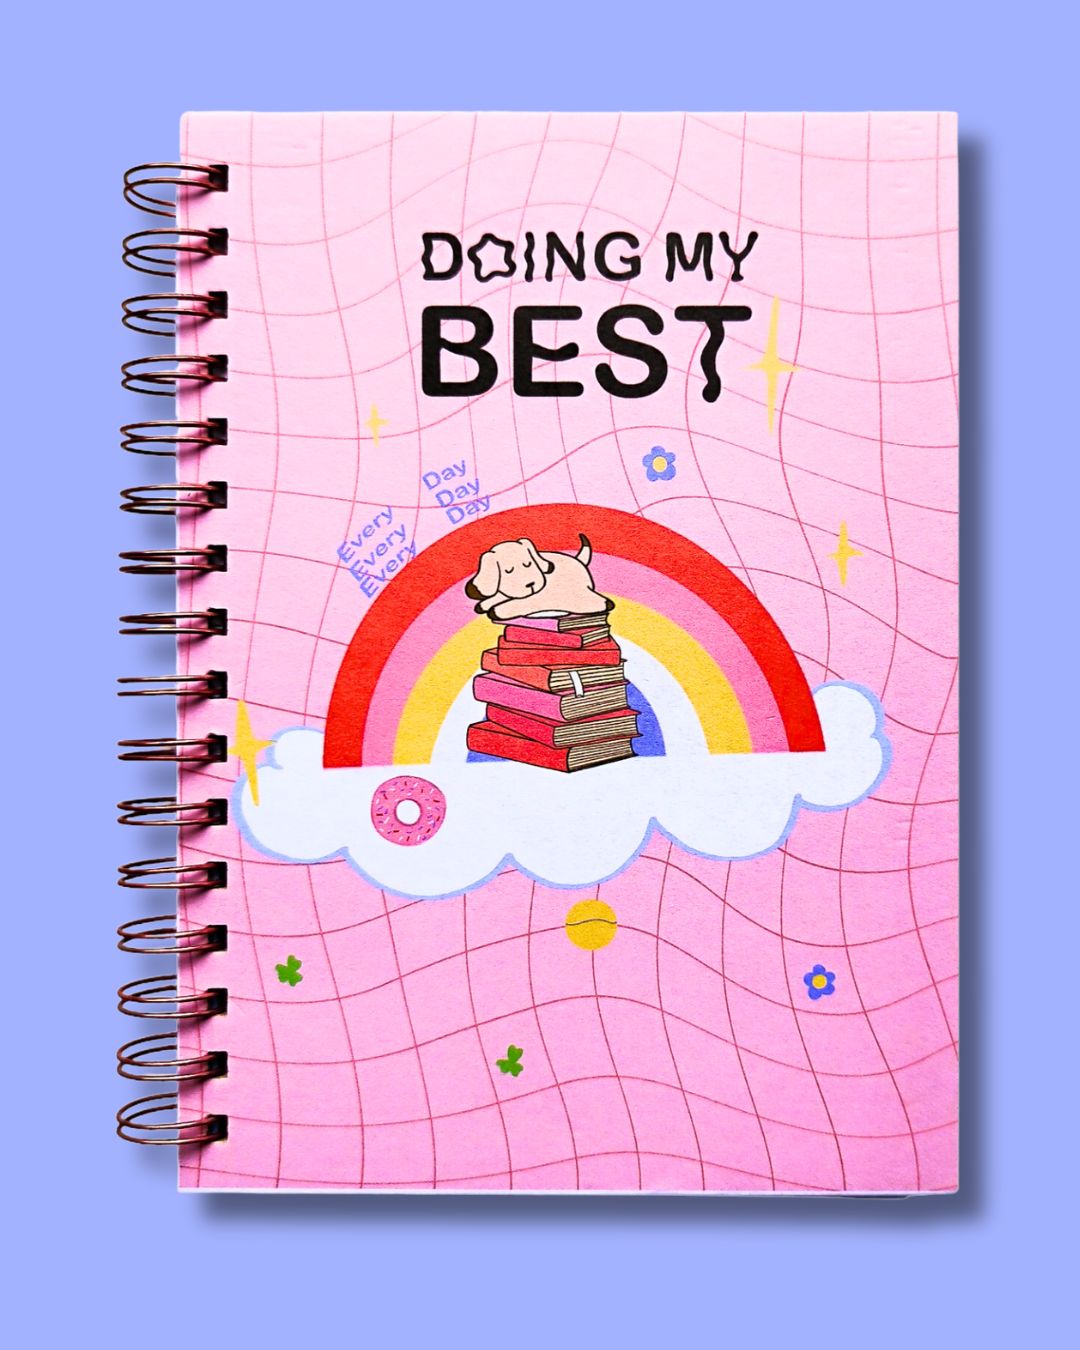 Bop Canvases - Fun and Playful Planners & Journals!